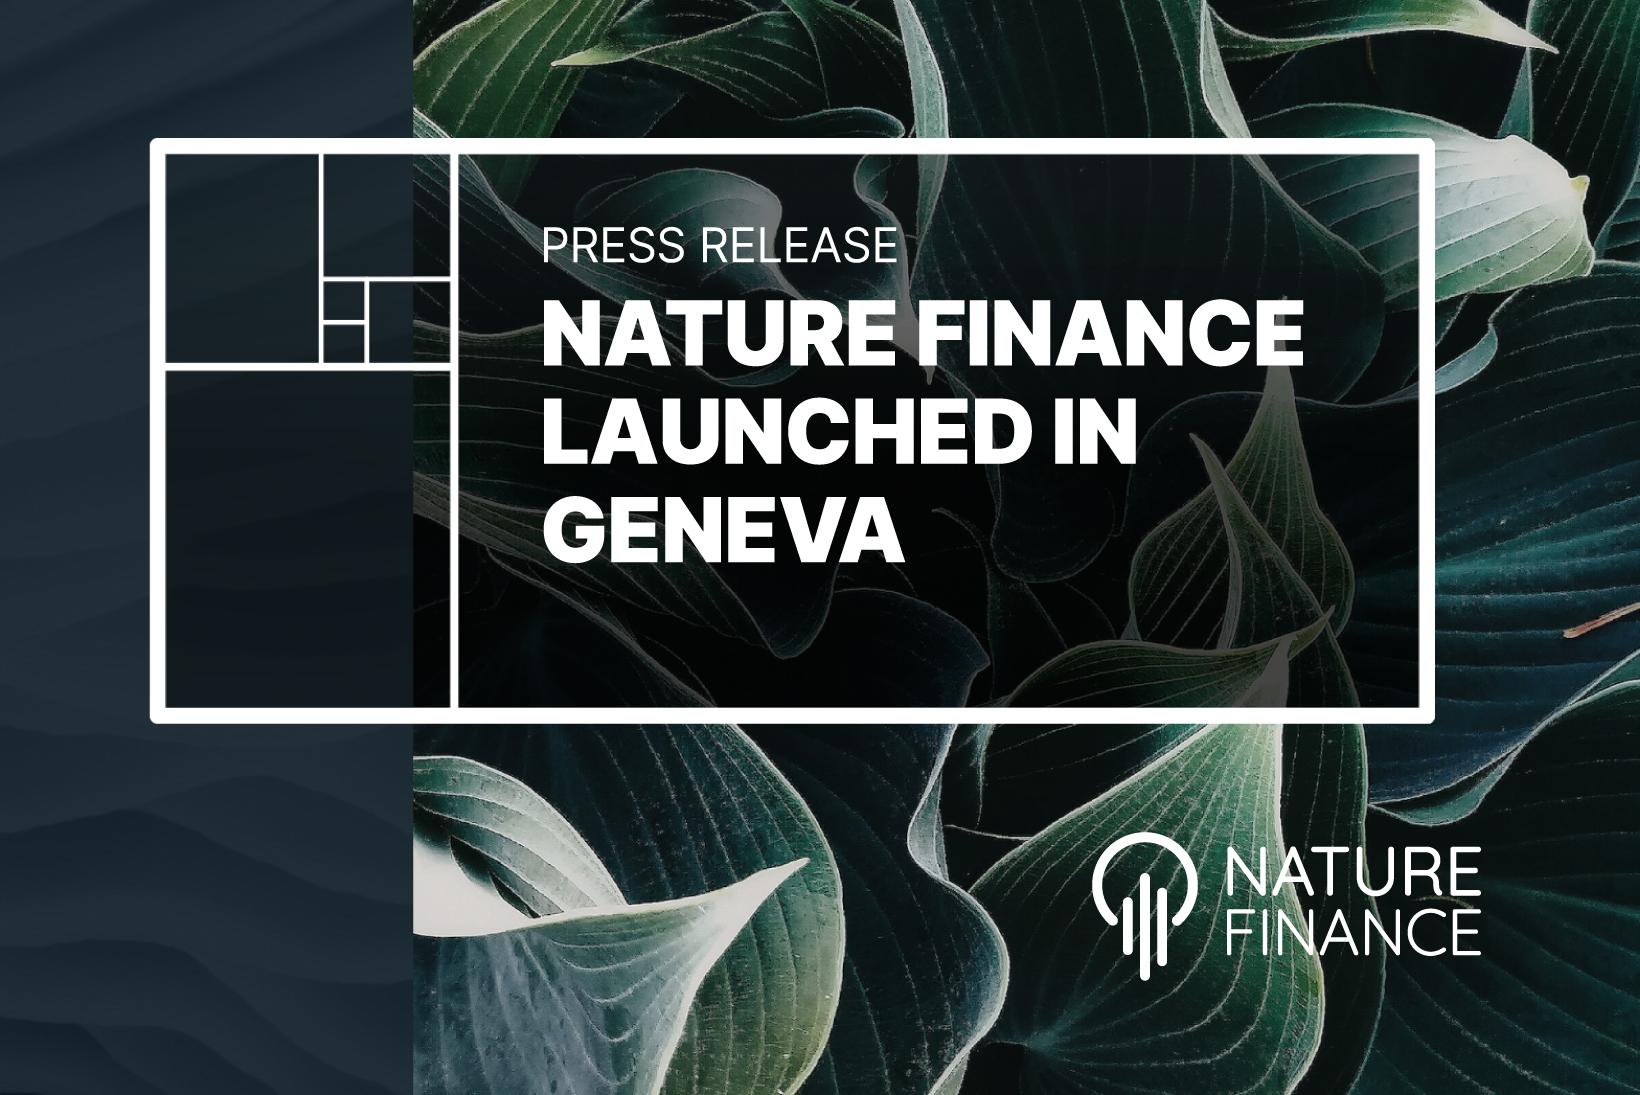 NatureFinance sets up in Geneva building global hub of excellence in nature and finance